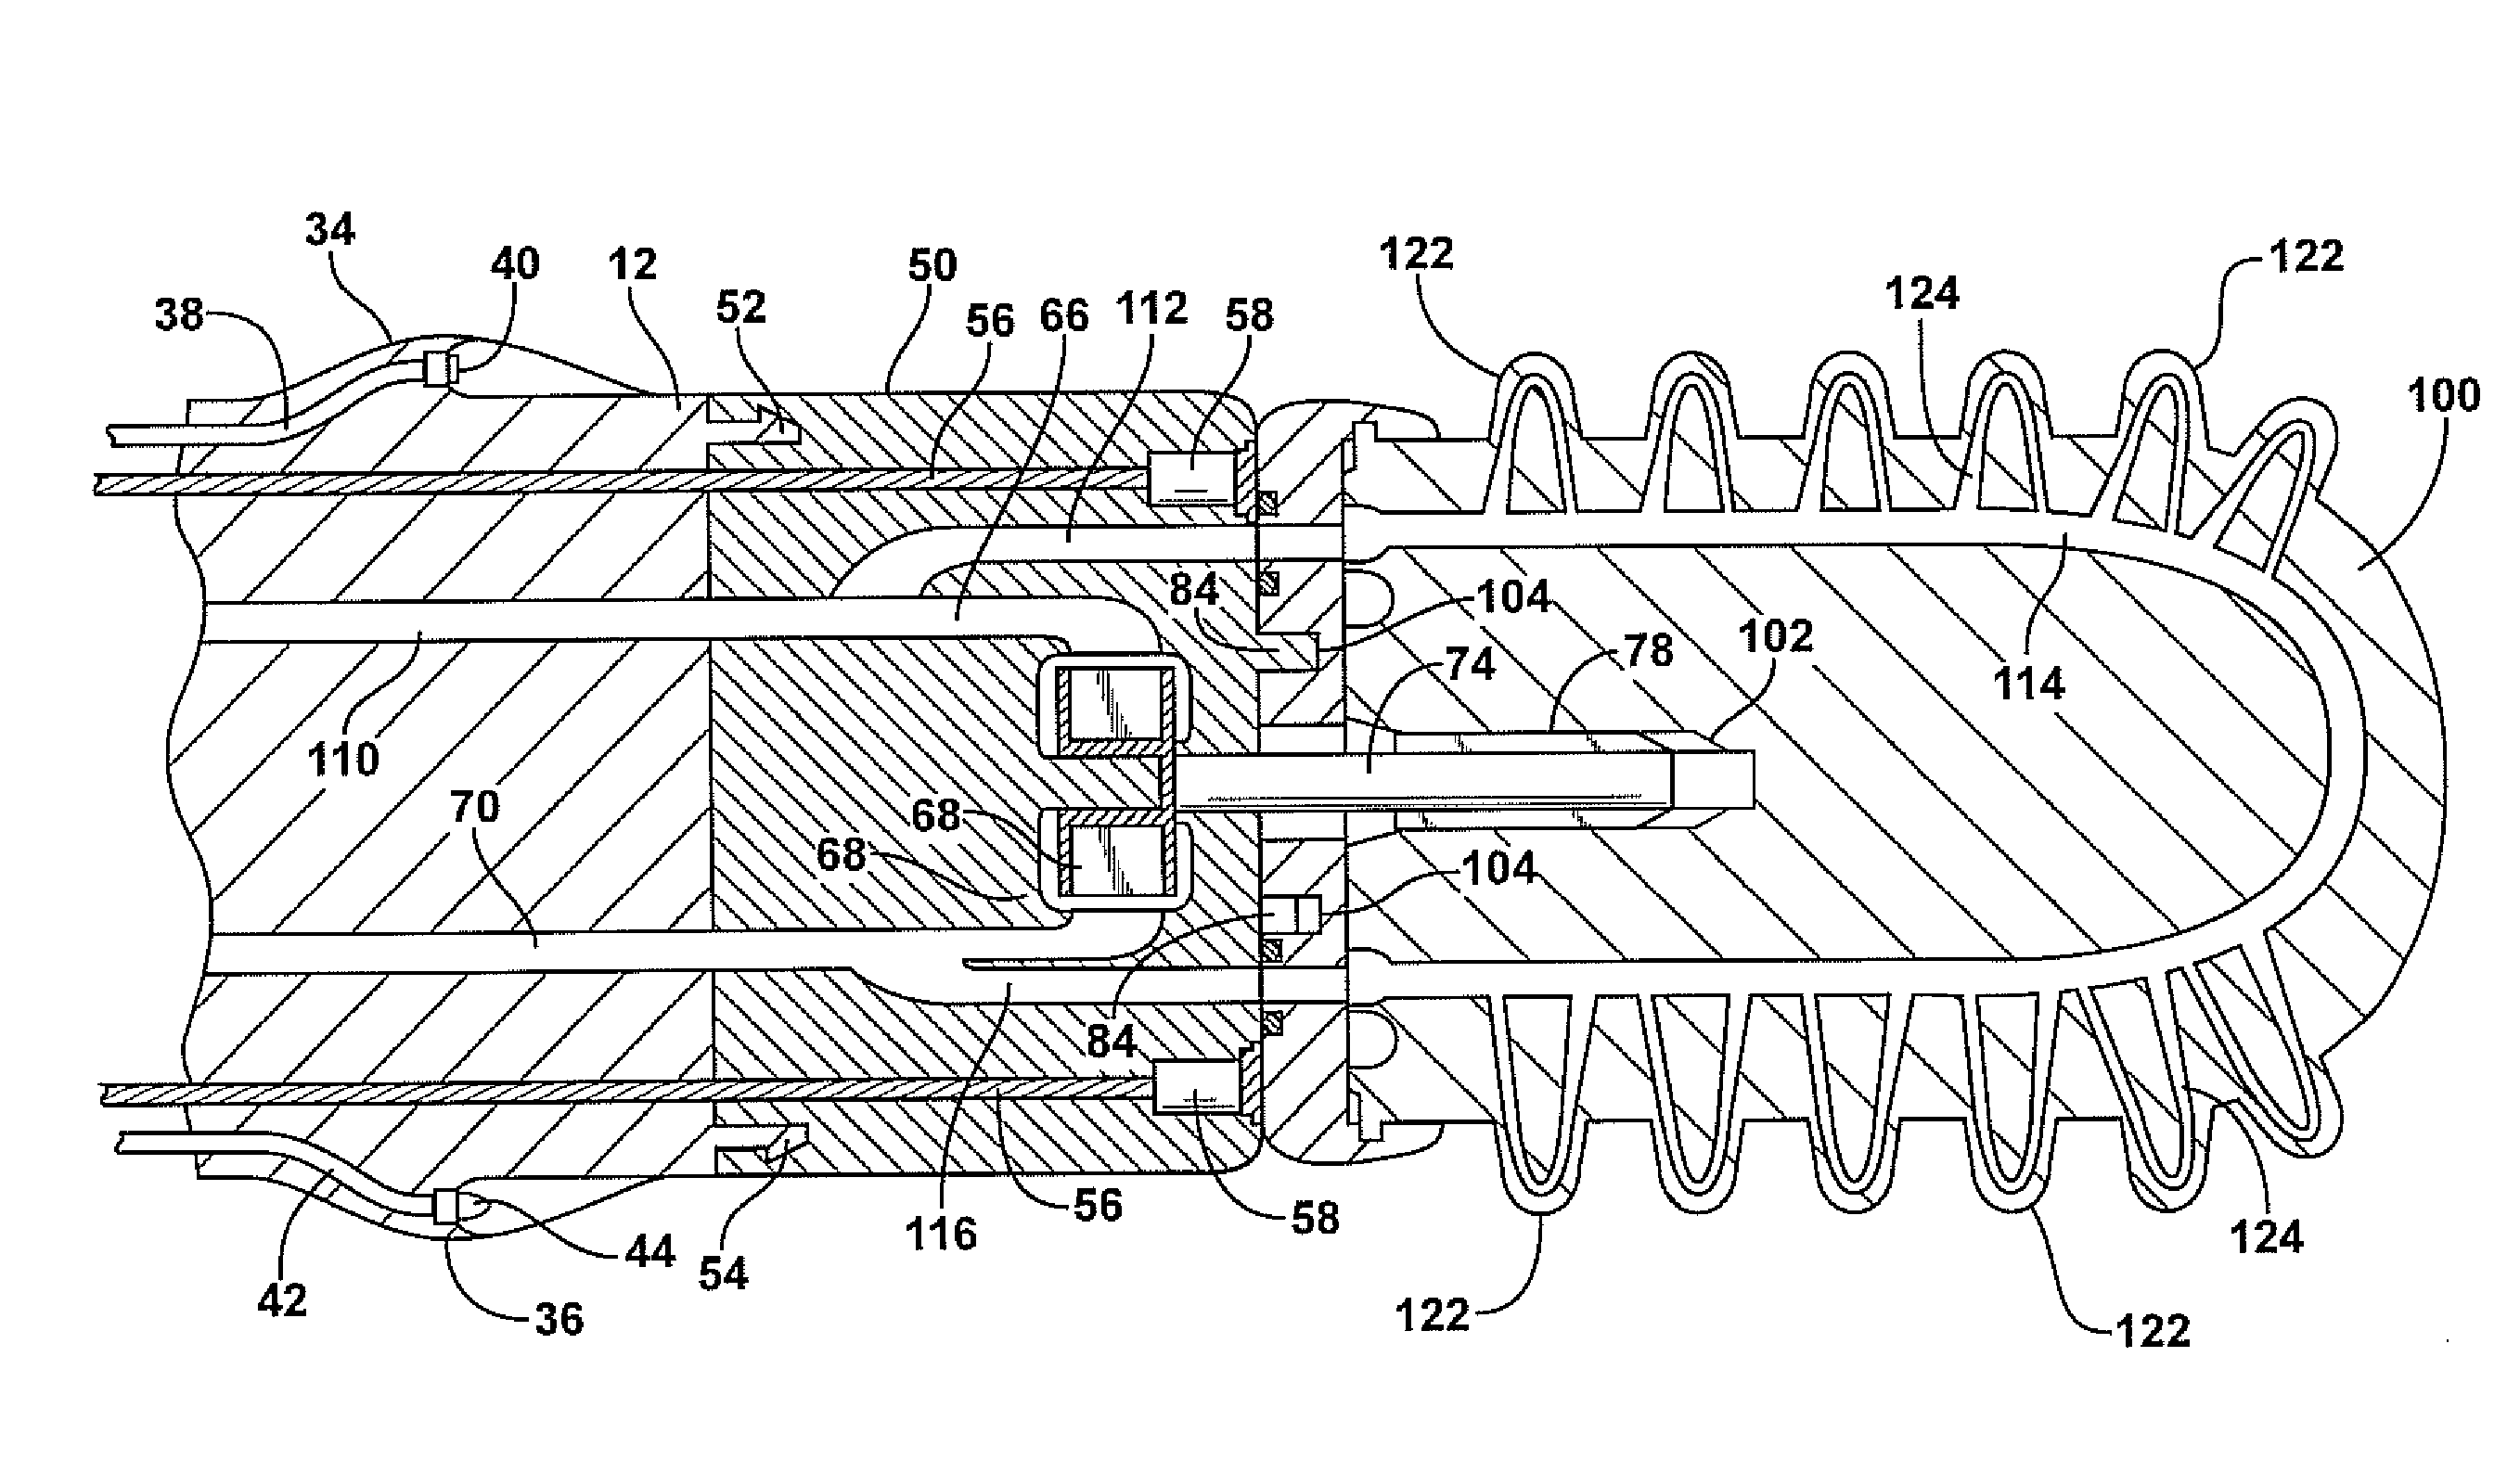 Endoscopic cutting and debriding device mounted on a flexible and maneuverable tube employing a fluid-driven turbine